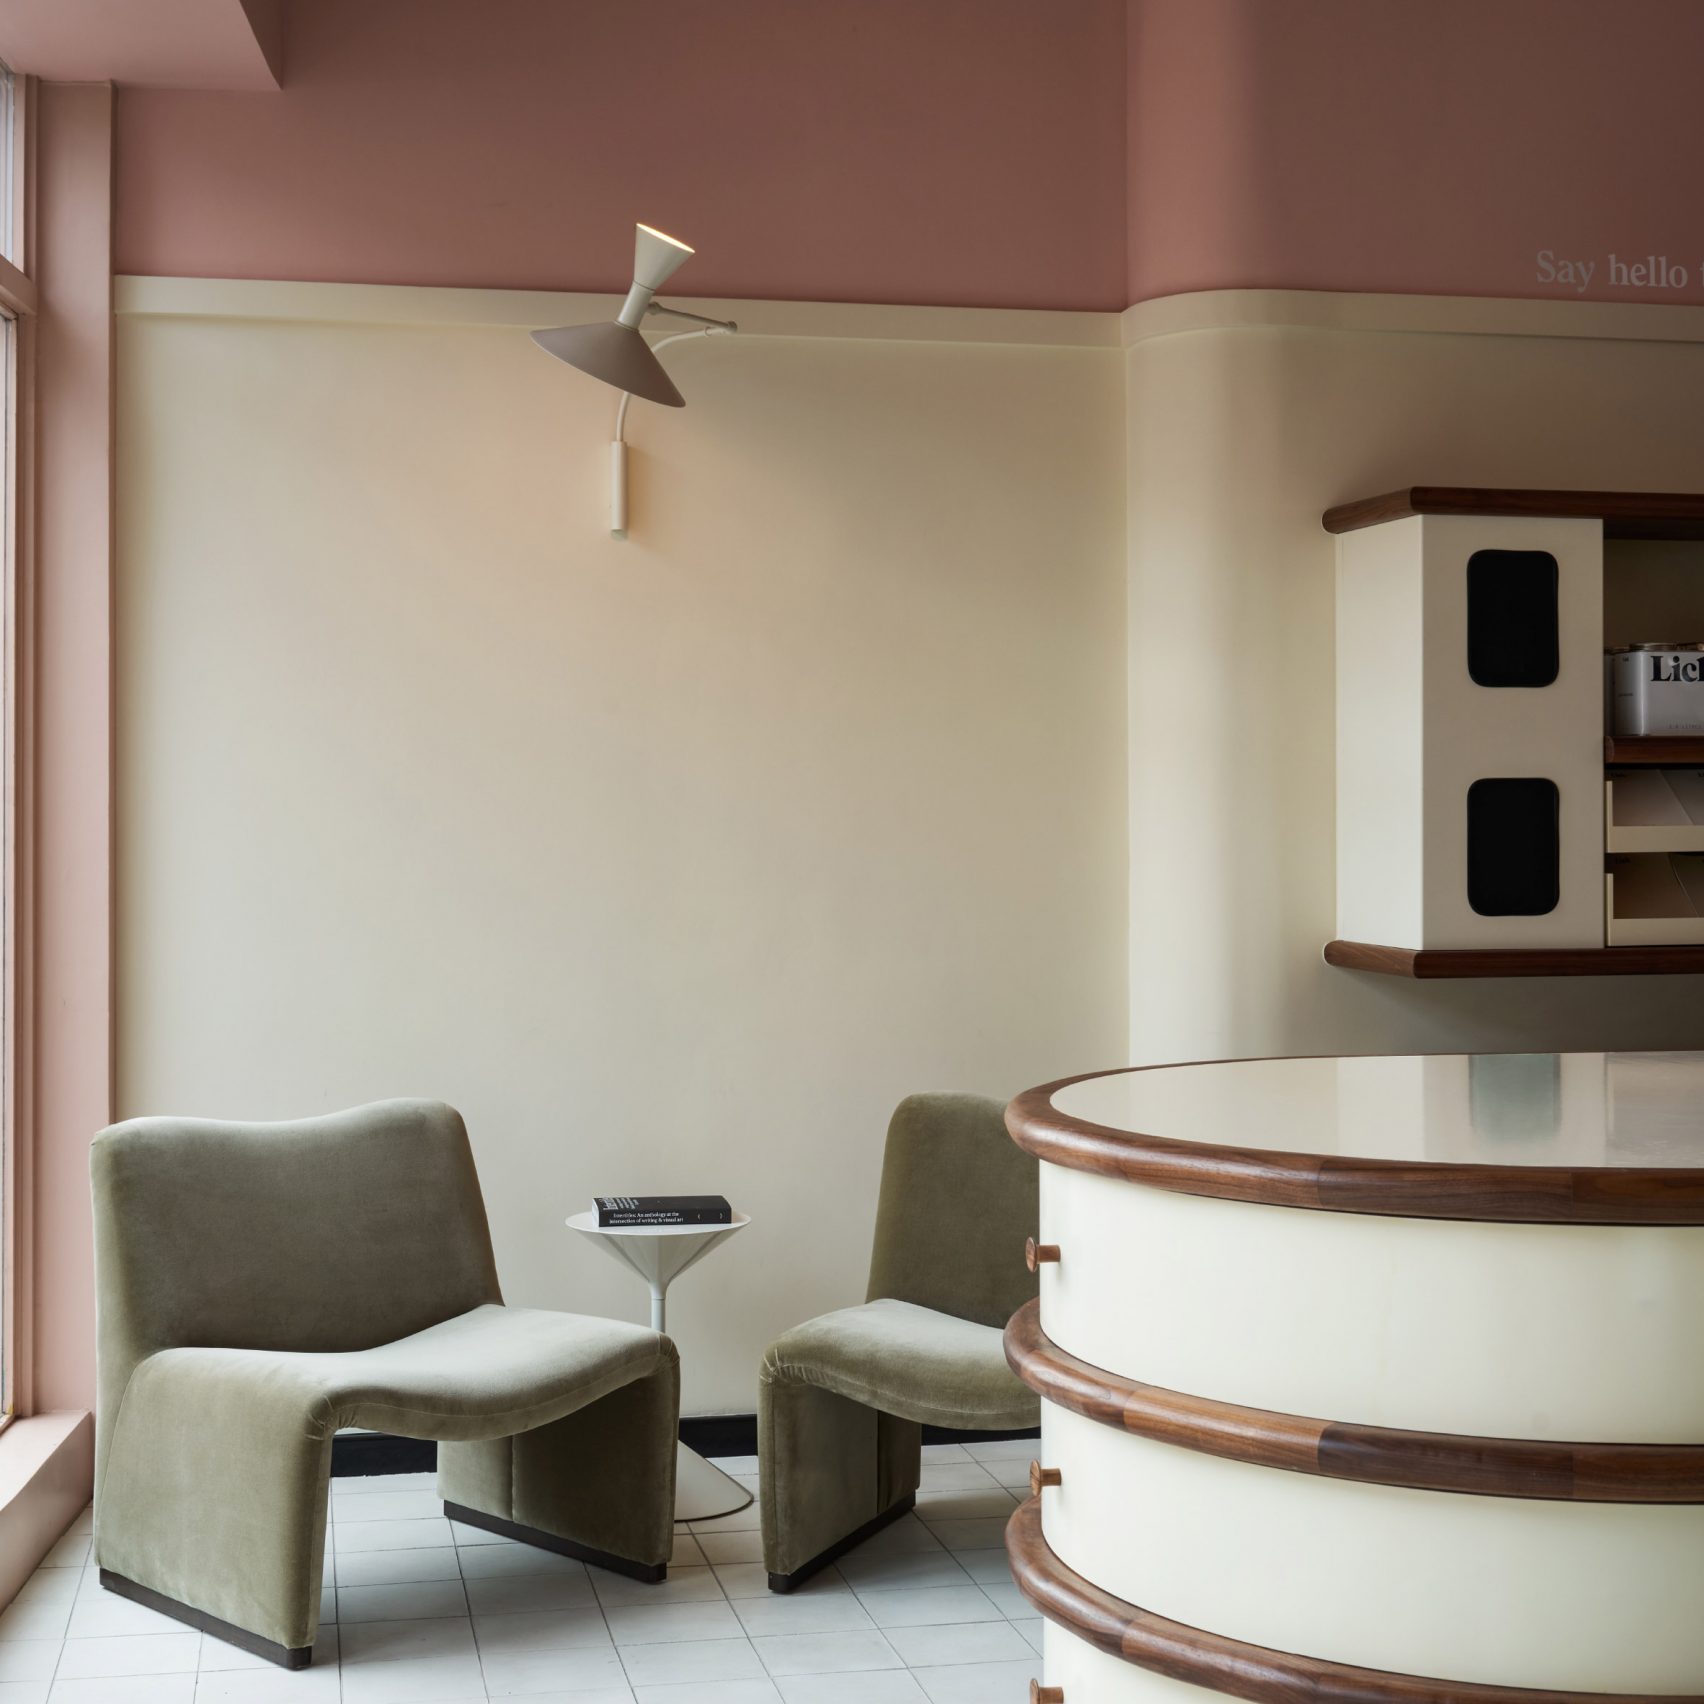 Lick paint shop in London has pink interiors